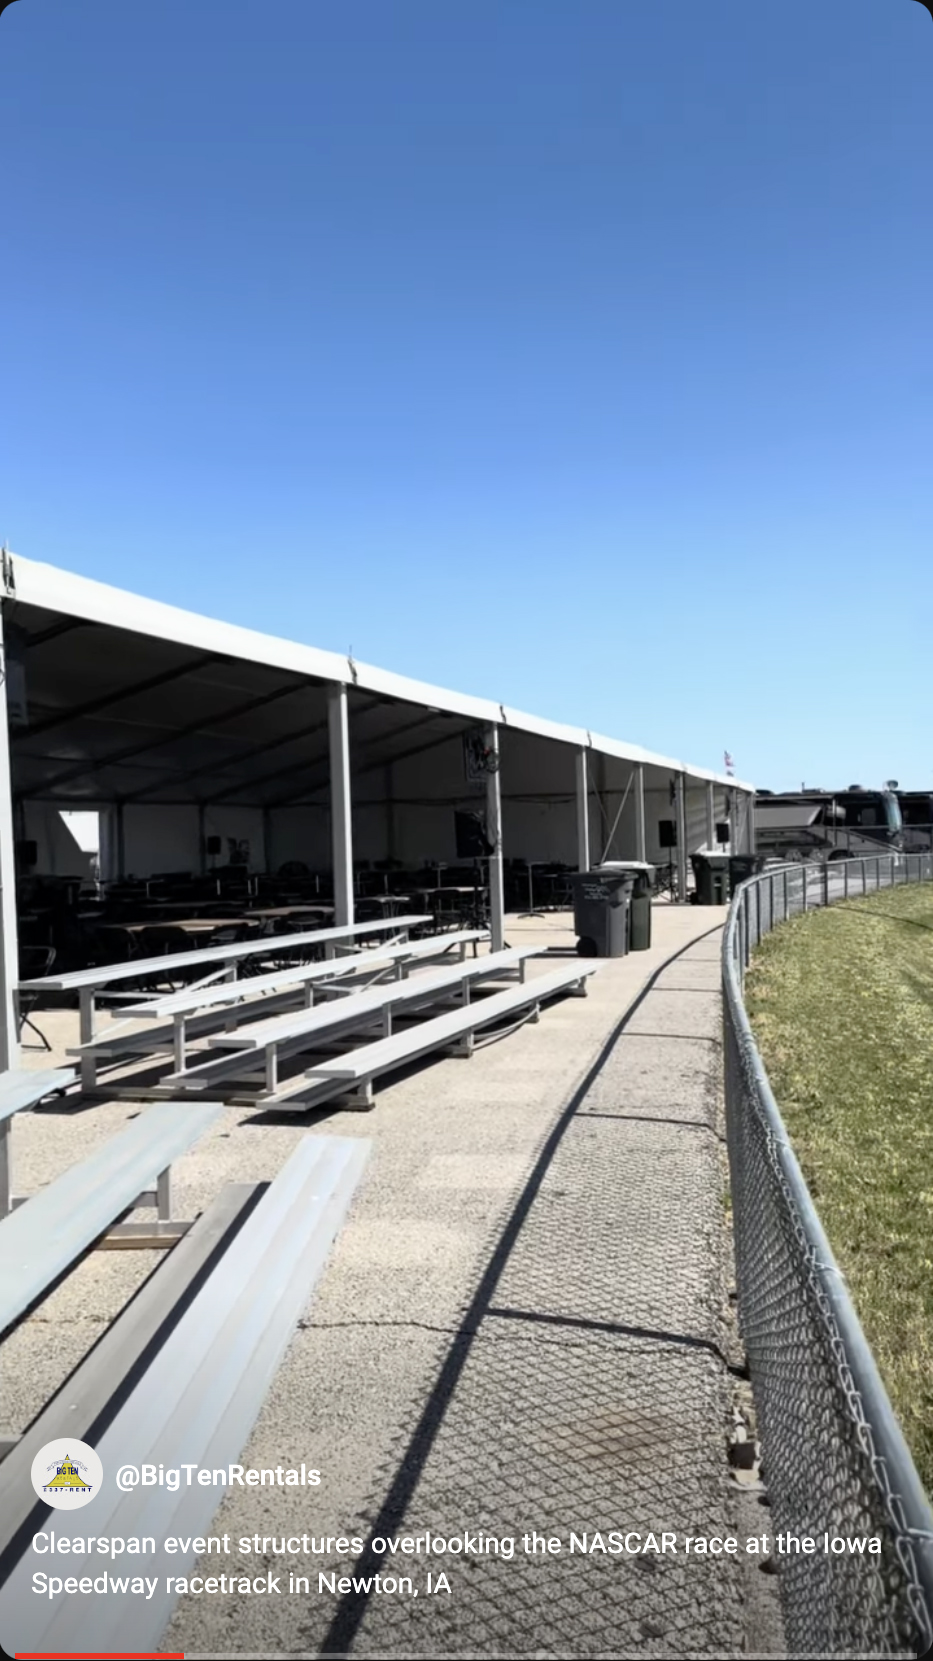 Clearspan event structures overlooking the NASCAR race at the Iowa Speedway racetrack in Newton, IA